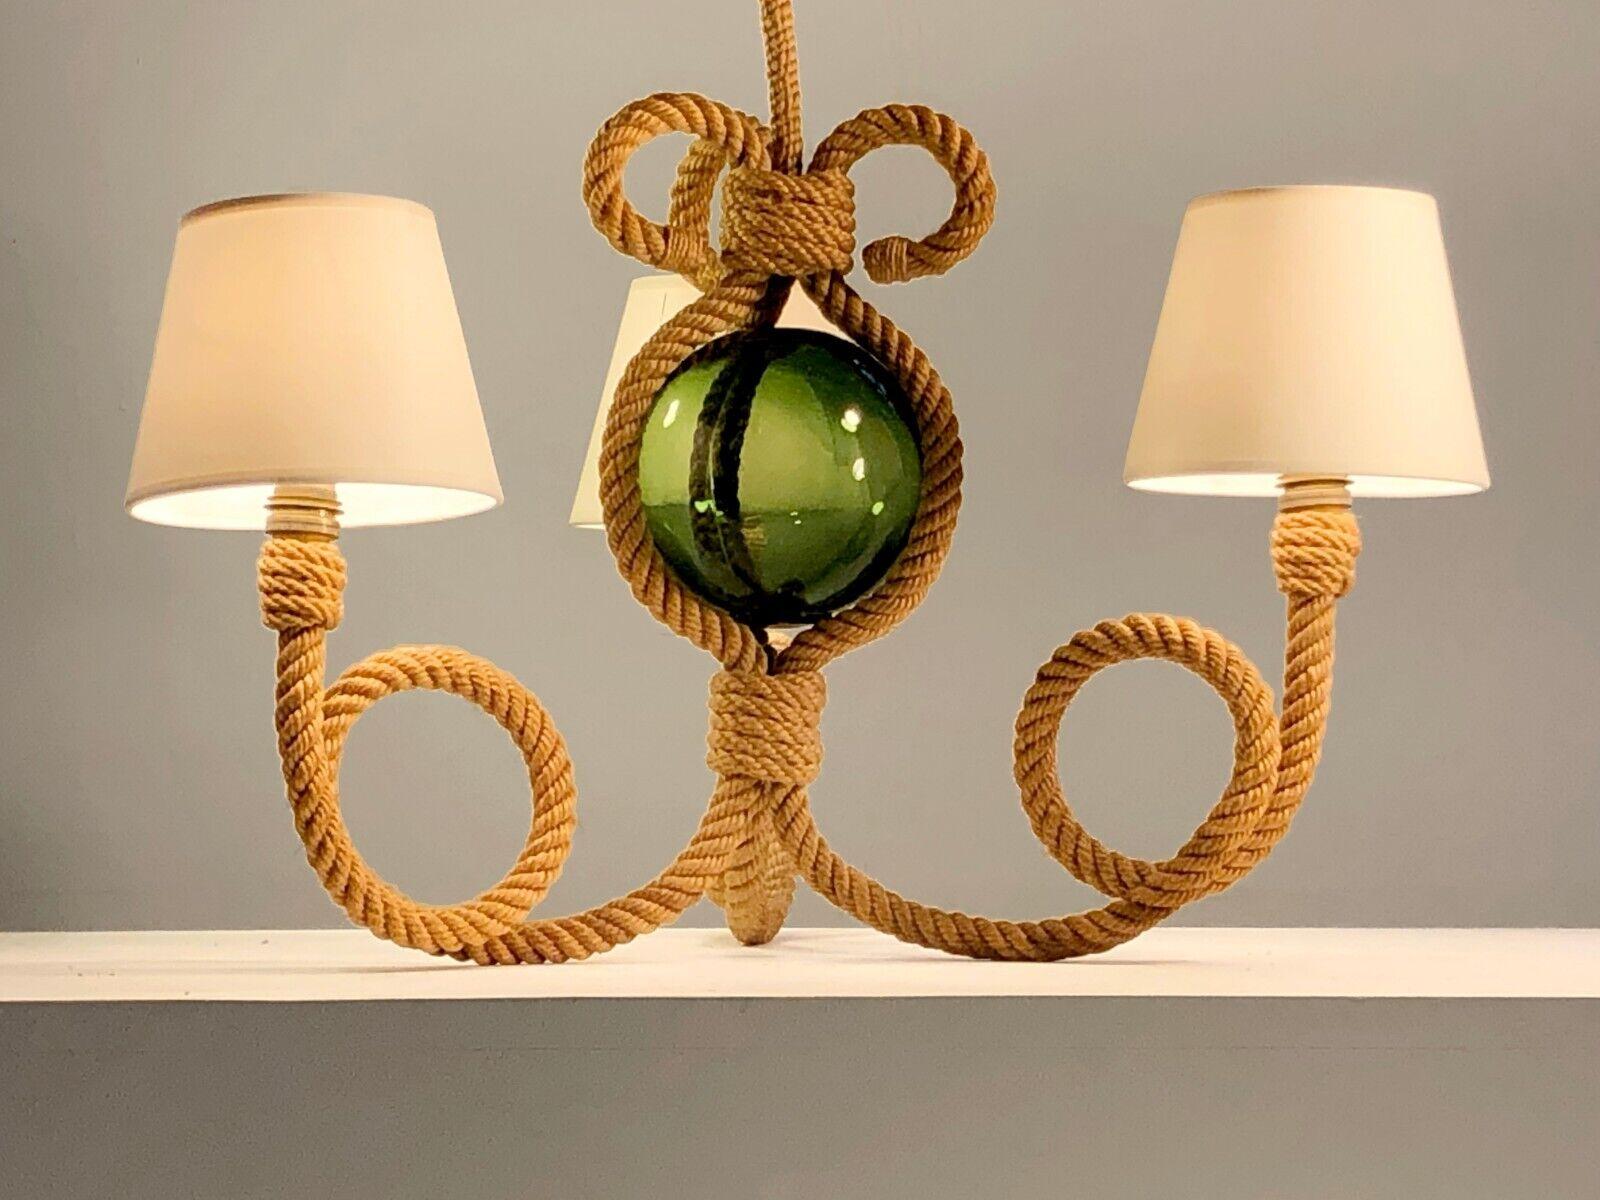 French Triple Rope Arm Chandelier by Adrien Audoux & Frida Minet & Biot Glass